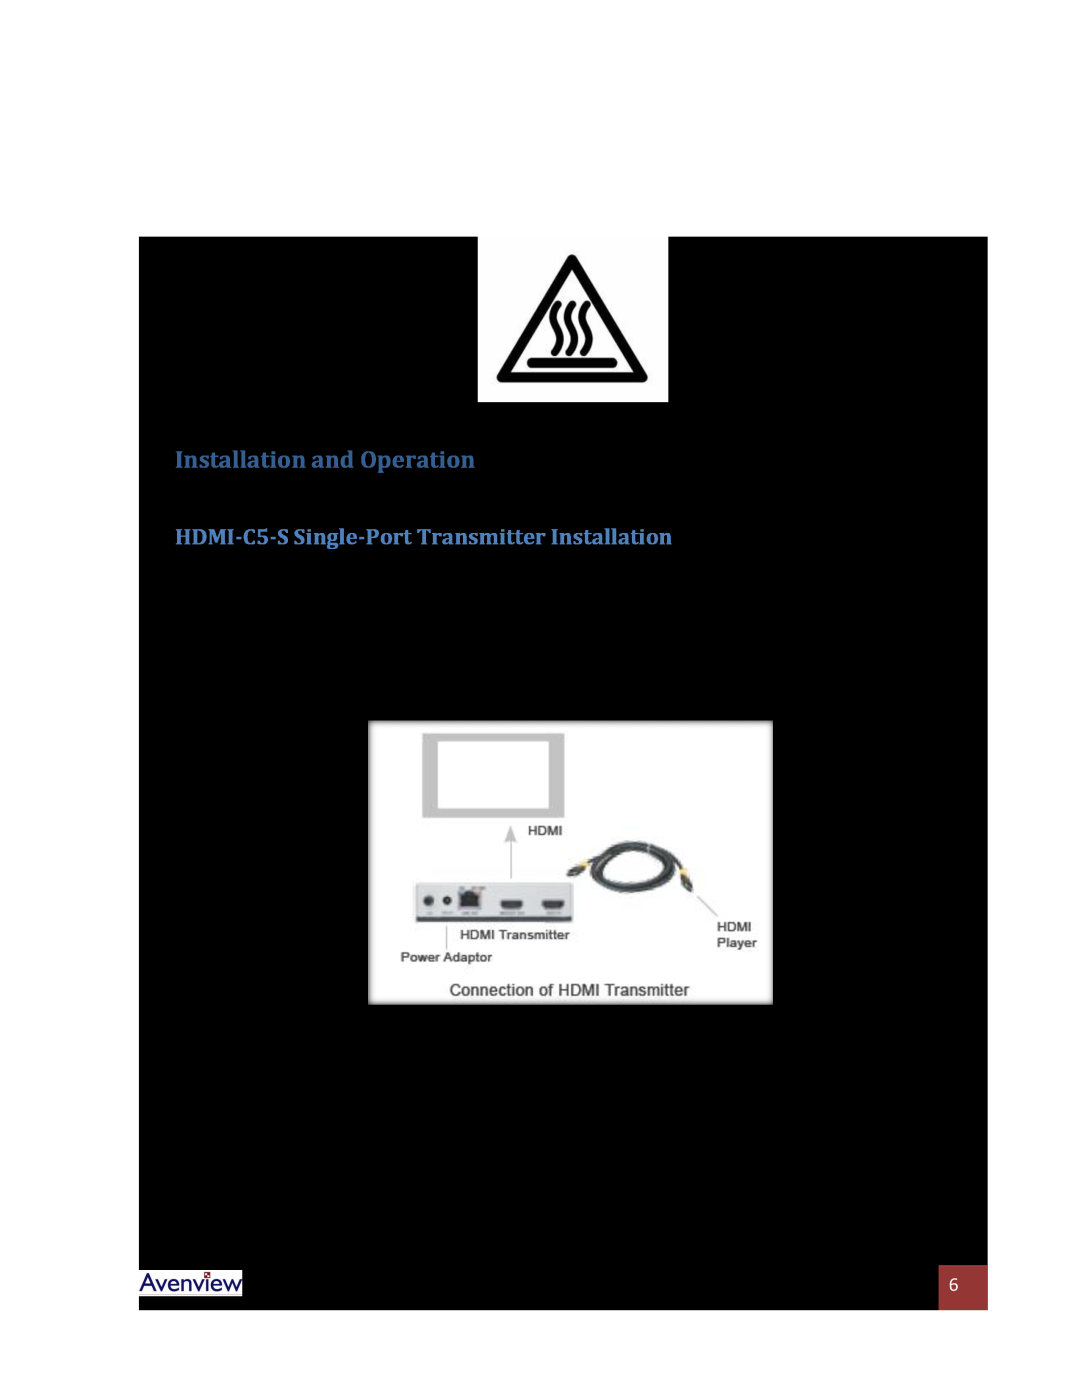 Avenview specifications Installation and Operation, HDMI-C5-S Single-Port Transmitter Installation 